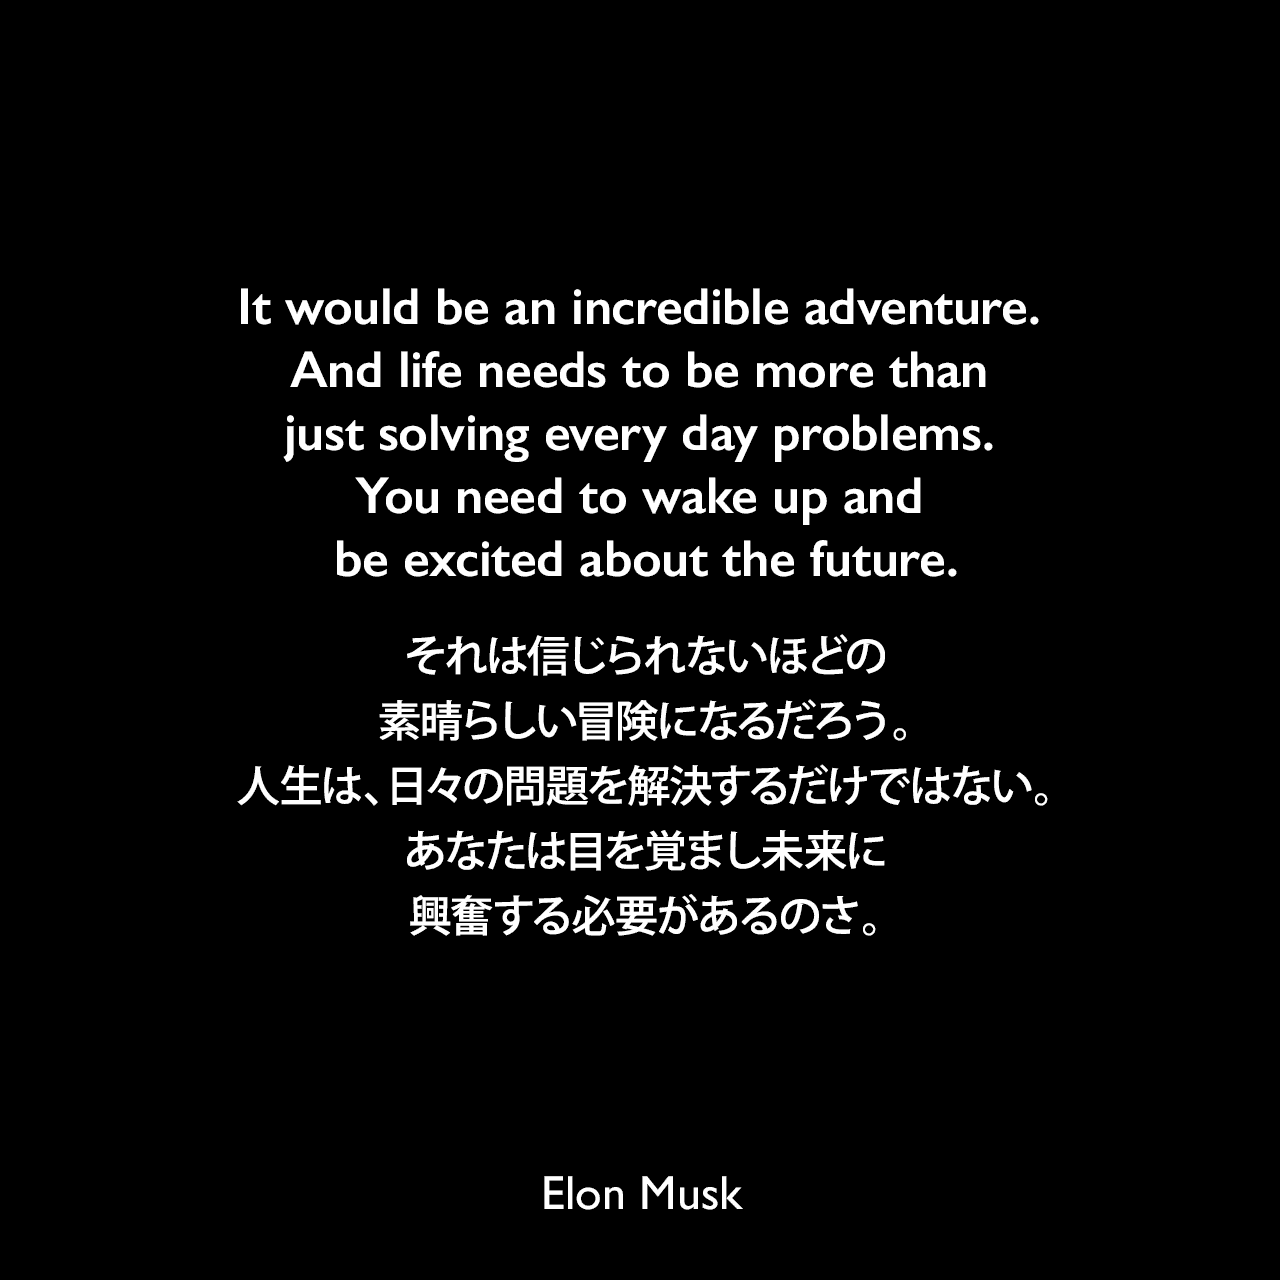 It would be an incredible adventure. And life needs to be more than just solving every day problems. You need to wake up and be excited about the future.それは信じられないほどの素晴らしい冒険になるだろう。人生は、日々の問題を解決するだけではない。あなたは目を覚まし未来に興奮する必要があるのさ。- IAC 2016会議で「持続可能な火星植民地化」についてのプレゼンテーションよりElon Musk